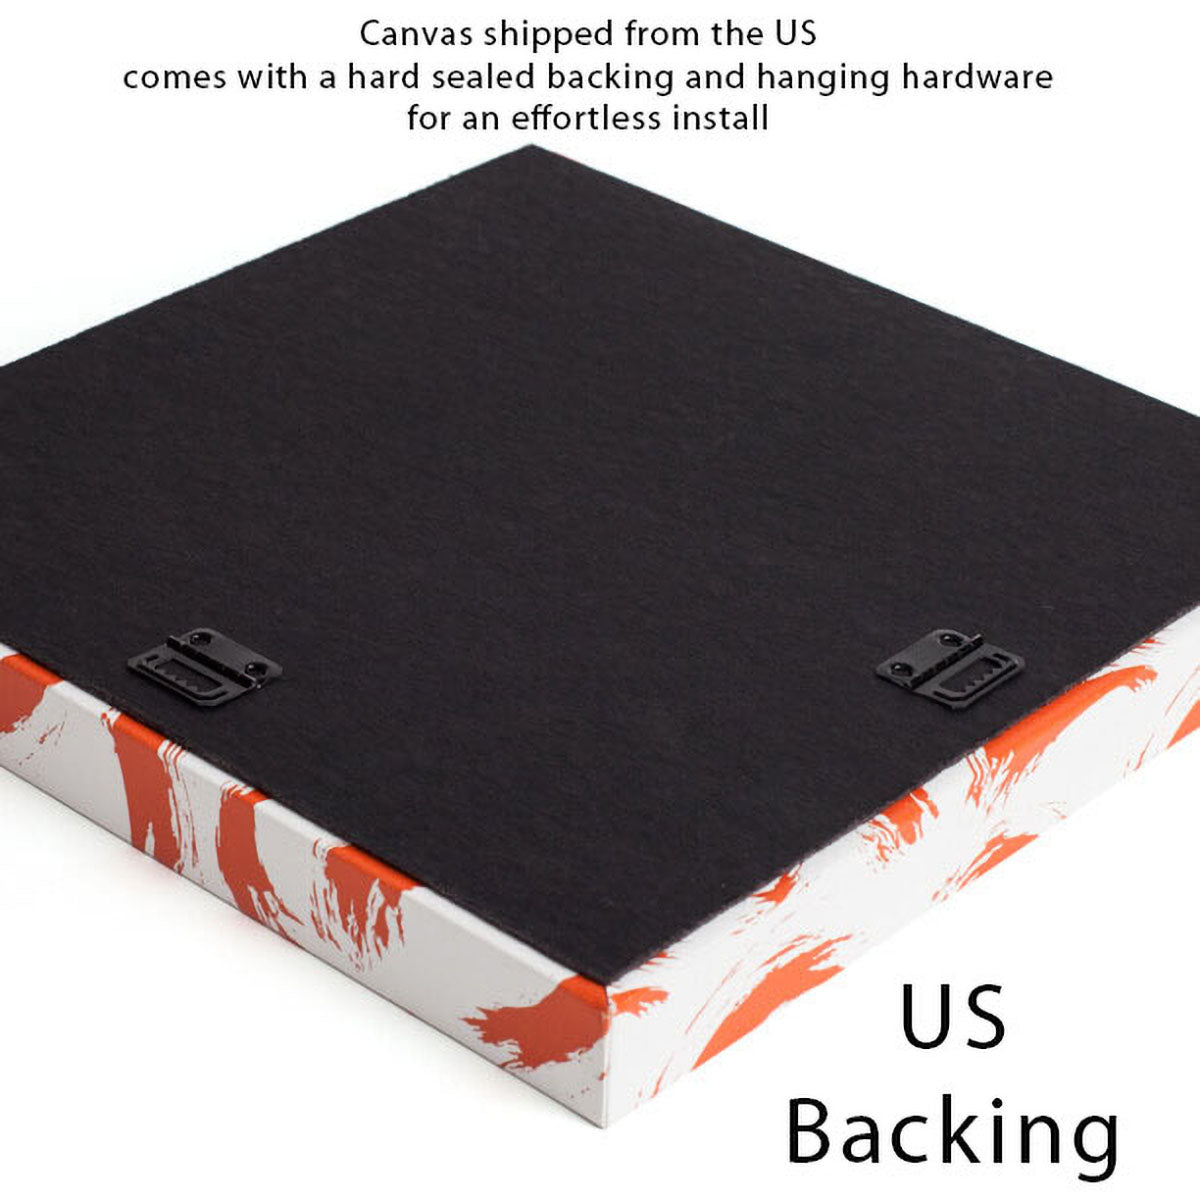 Back of canvas when shipped to the US